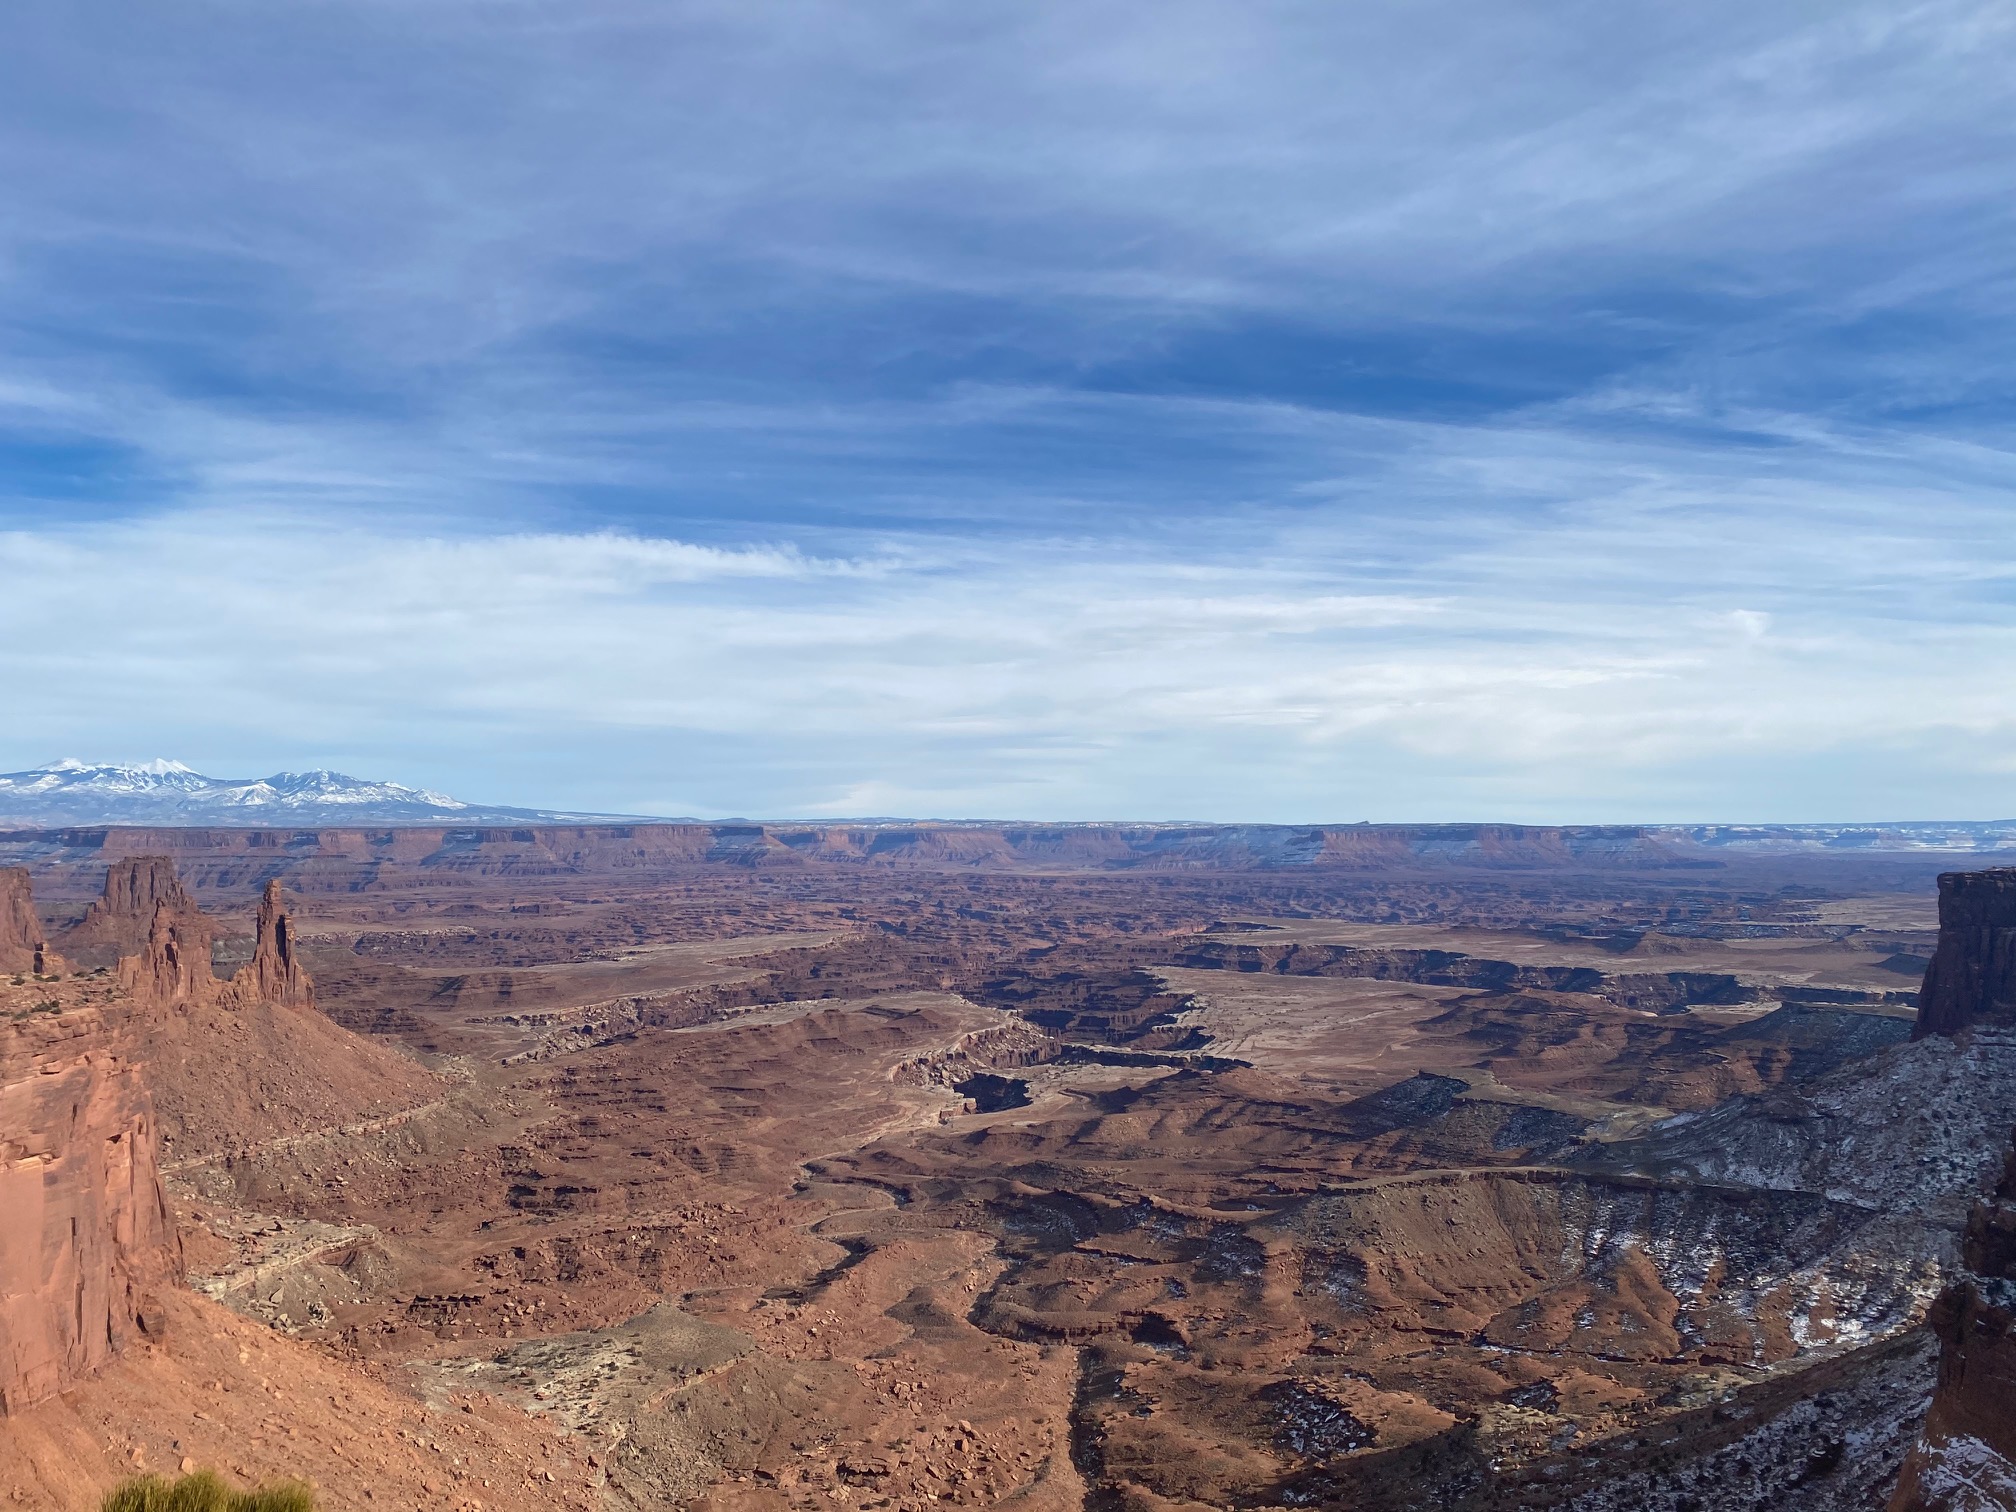 Vast, panoramic view looking down at canyons and mesas in Canyonlands National Park.